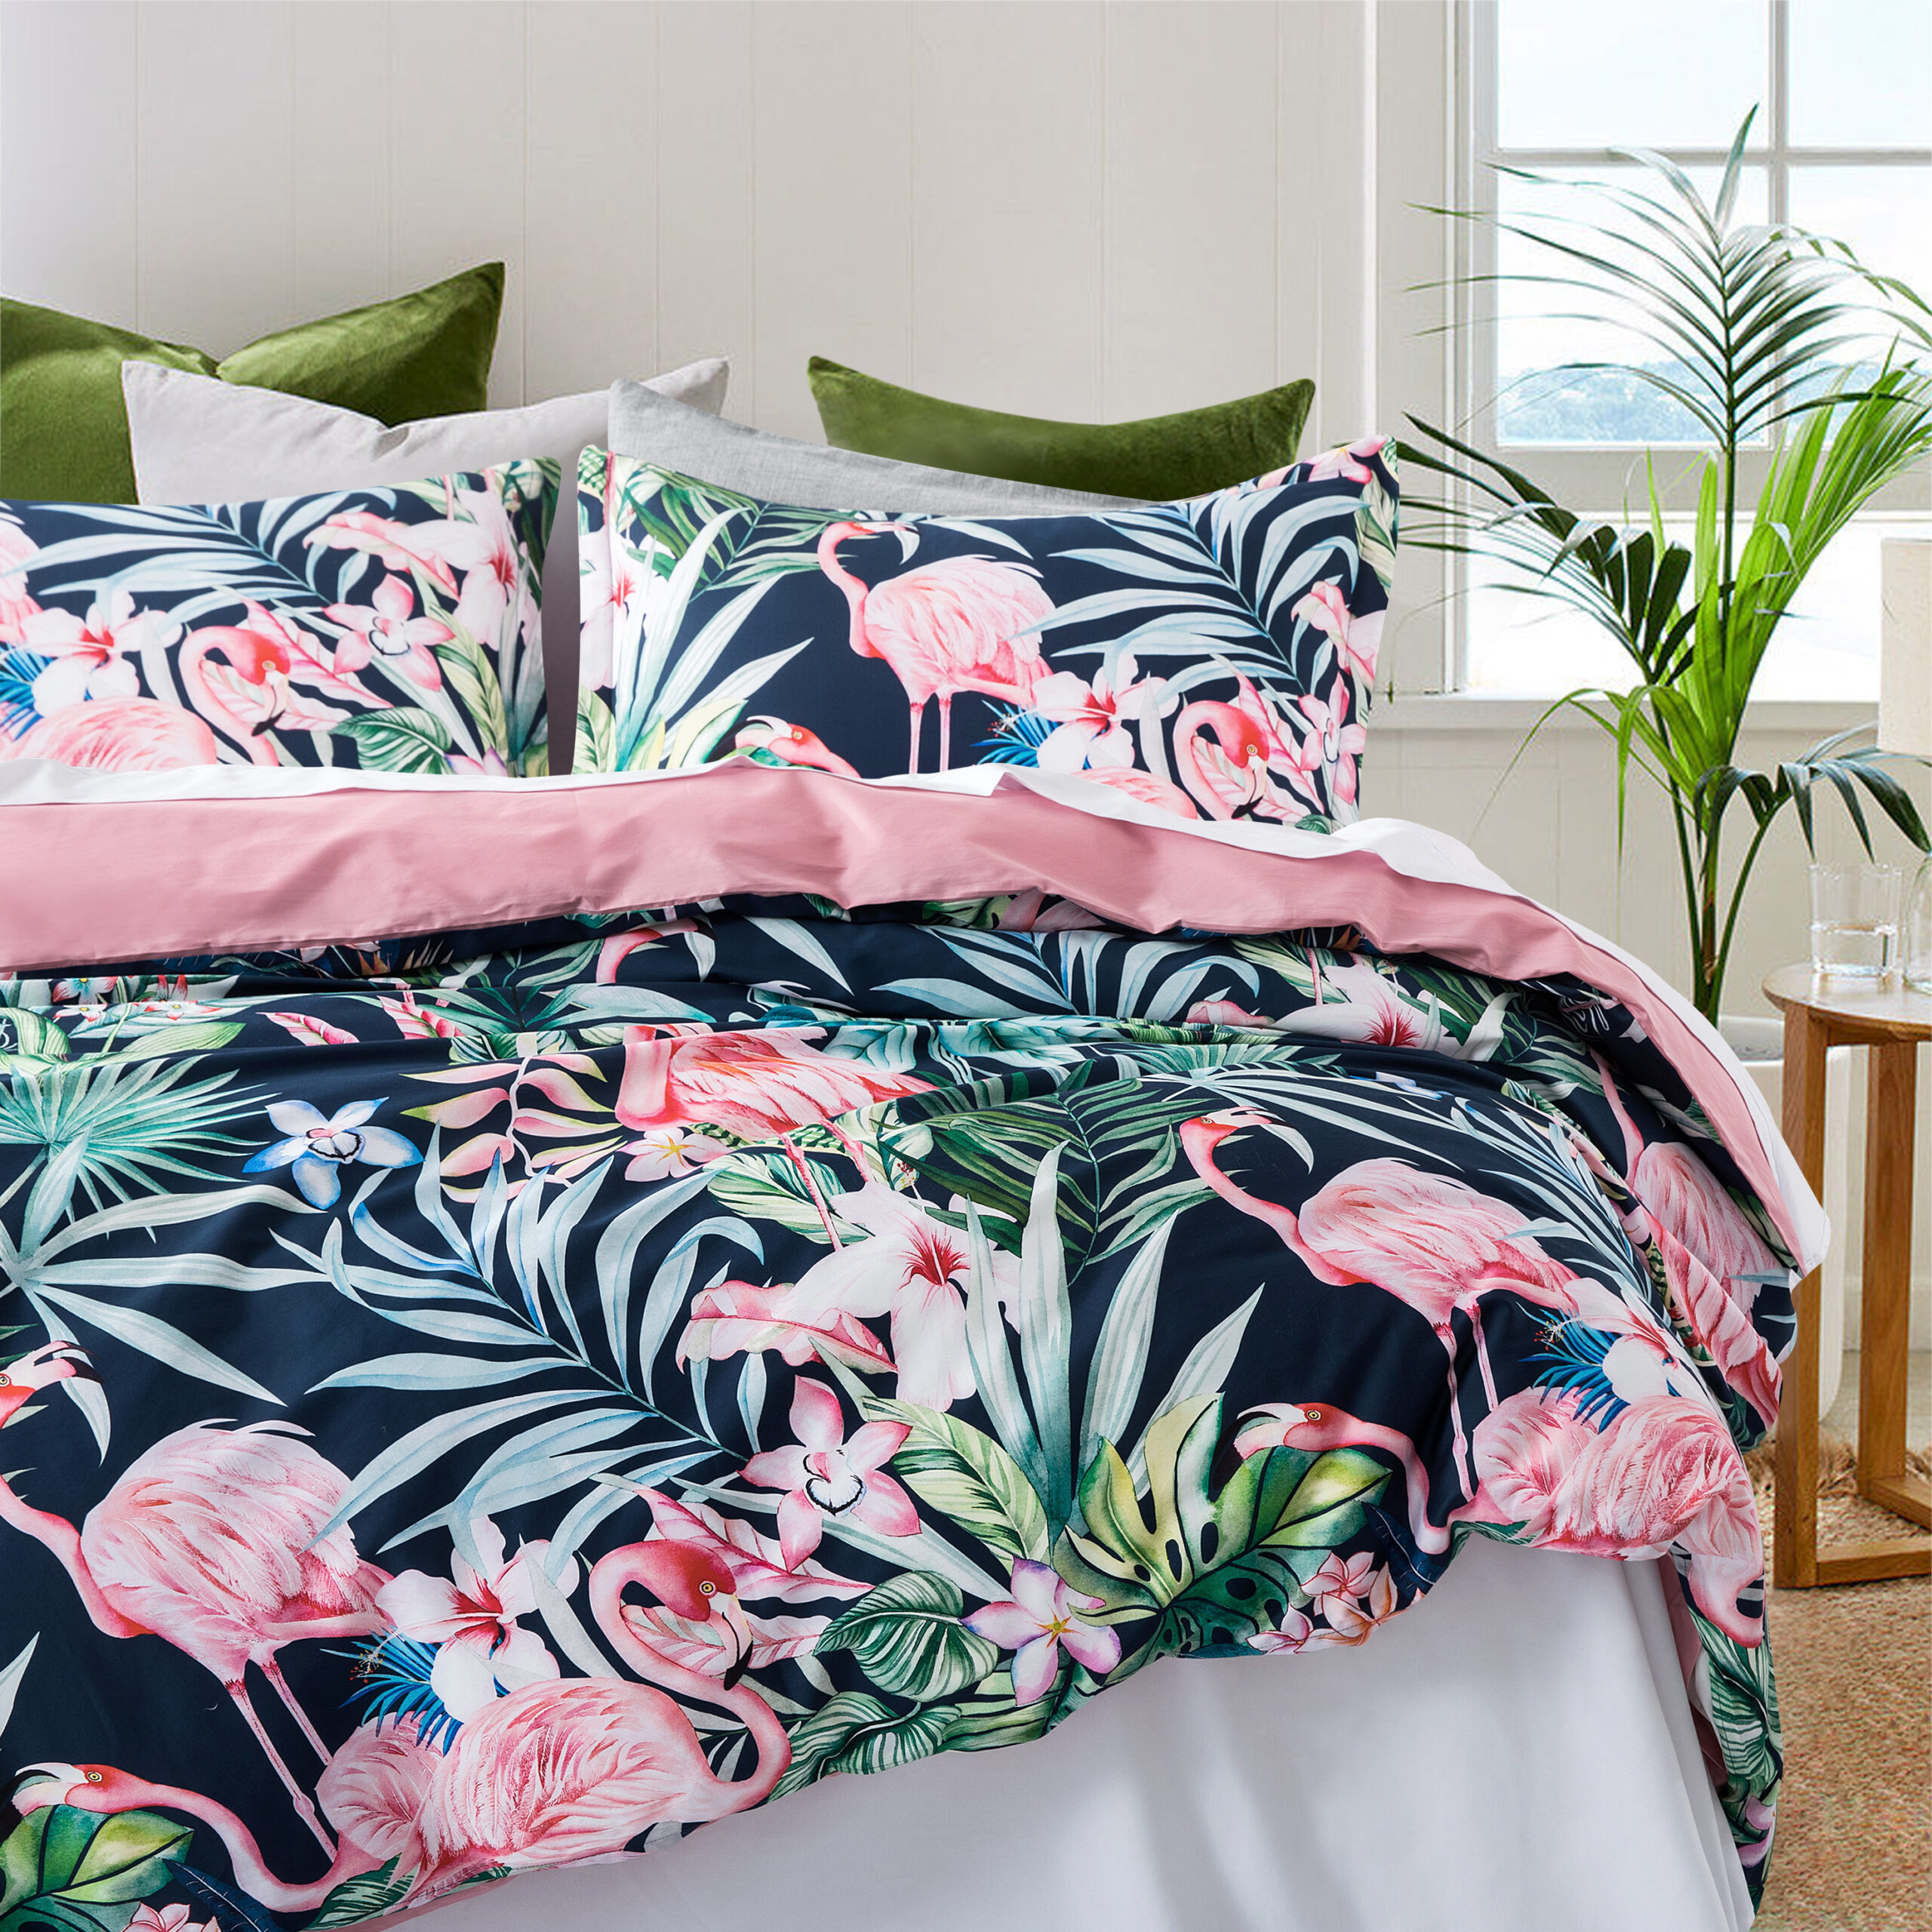 Singingin Ultra Soft Flannel Fleece Bed Blanket Summer Tropical Colorful Palm Leaves Watercolor Throw Blanket All Season Warm Fuzzy Light Weight Cozy Plush Blankets for Living Room/Bedroom 40 x 60 